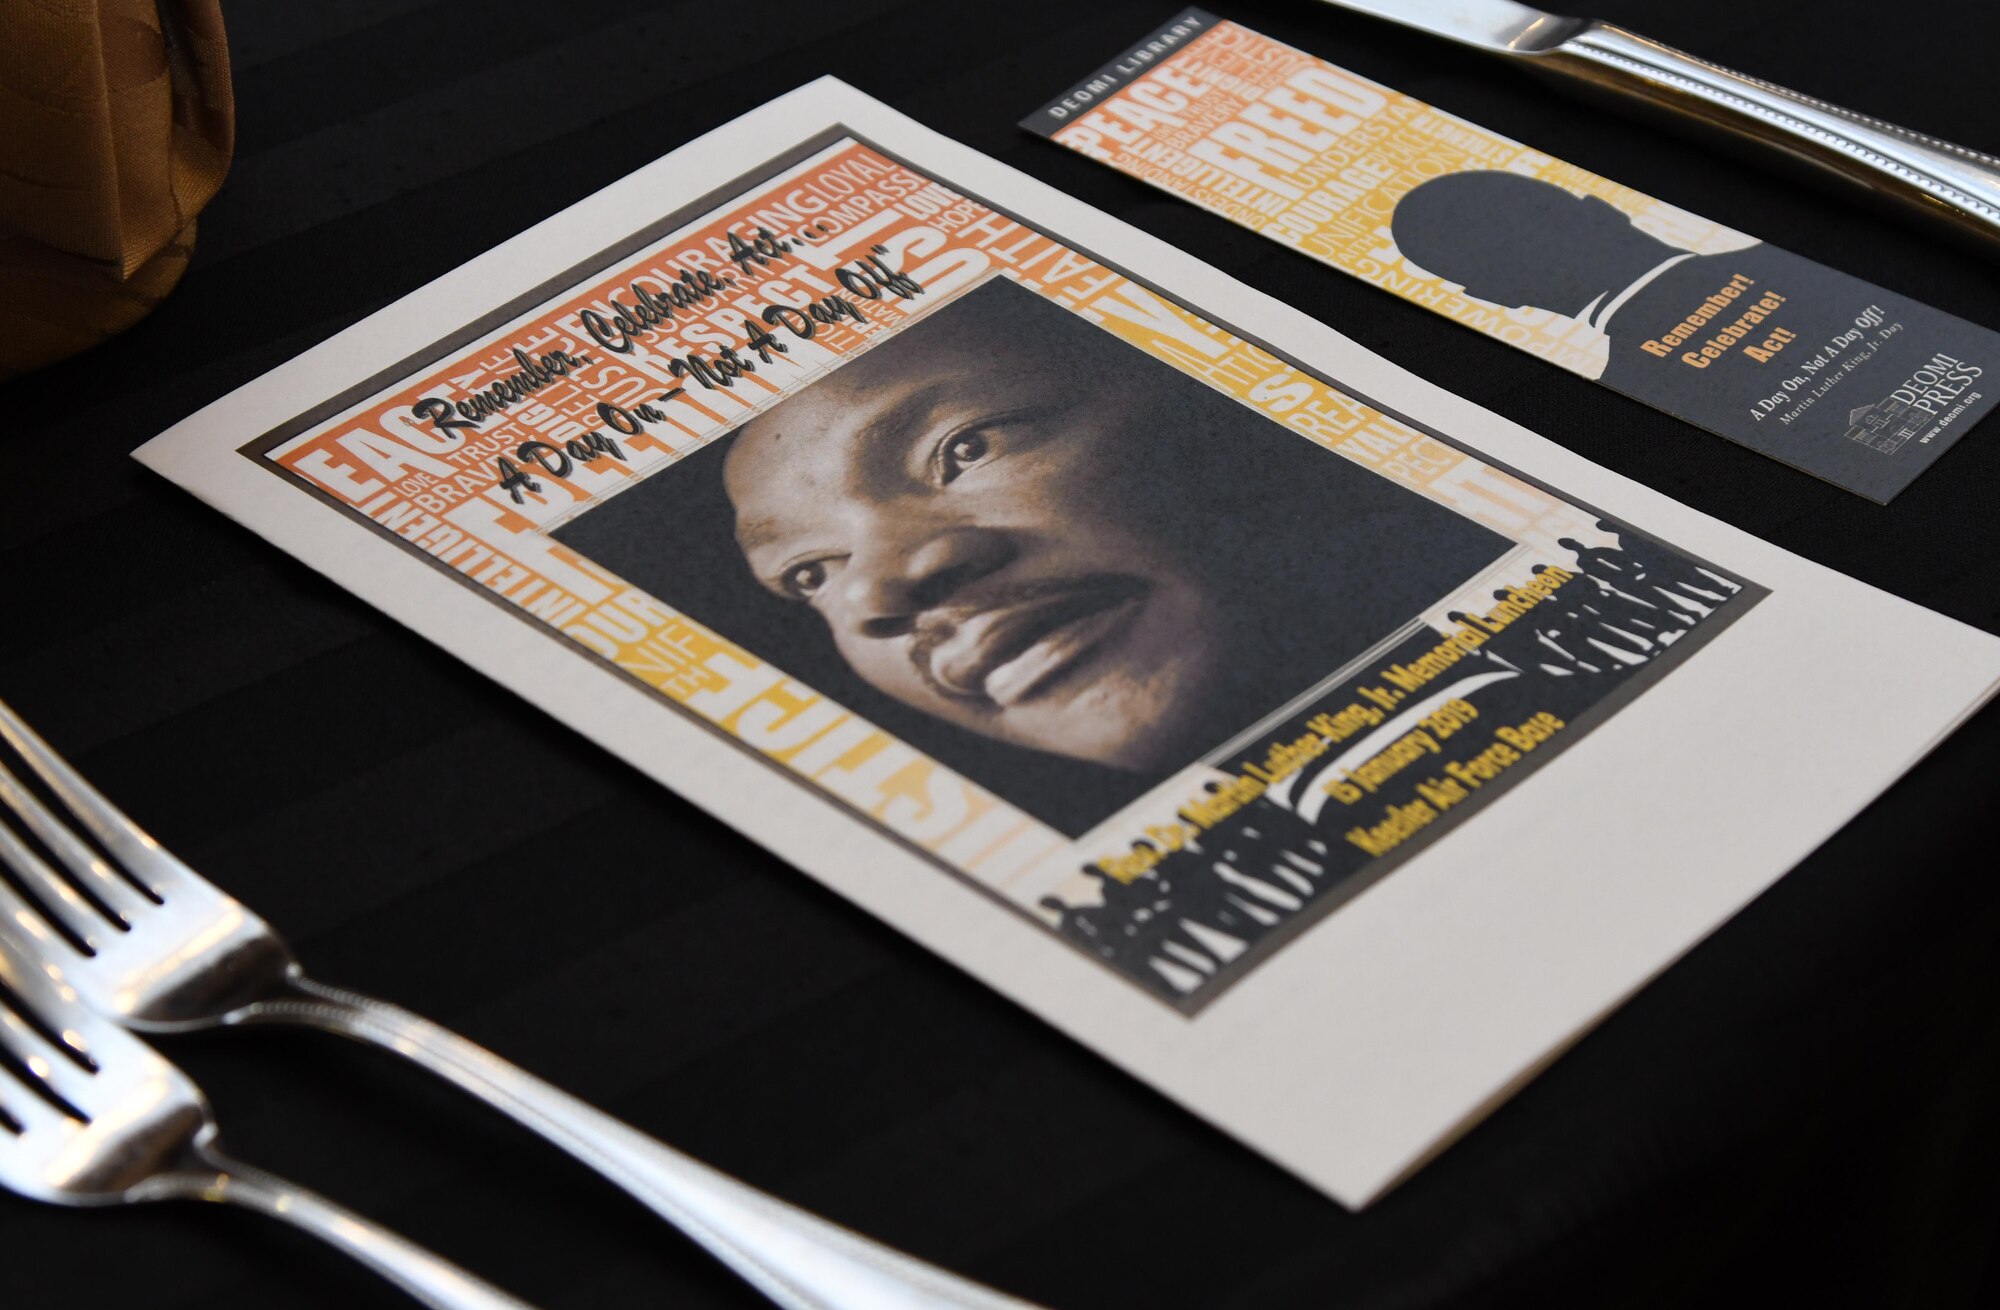 An event program is on display at the annual Dr. Martin Luther King Jr. Memorial Luncheon at the Bay Breeze Event Center on Keesler Air Force Base, Mississippi, Jan. 15, 2019. The 81st Training Wing and Wing Staff Agencies hosted the event honoring King's legacy and his efforts to inspire civil rights activism within the African-American community. He is widely regarded as America's pre-eminent advocate of nonviolence and one of the greatest nonviolent leaders in world history. (U.S. Air Force photo by Kemberly Groue)